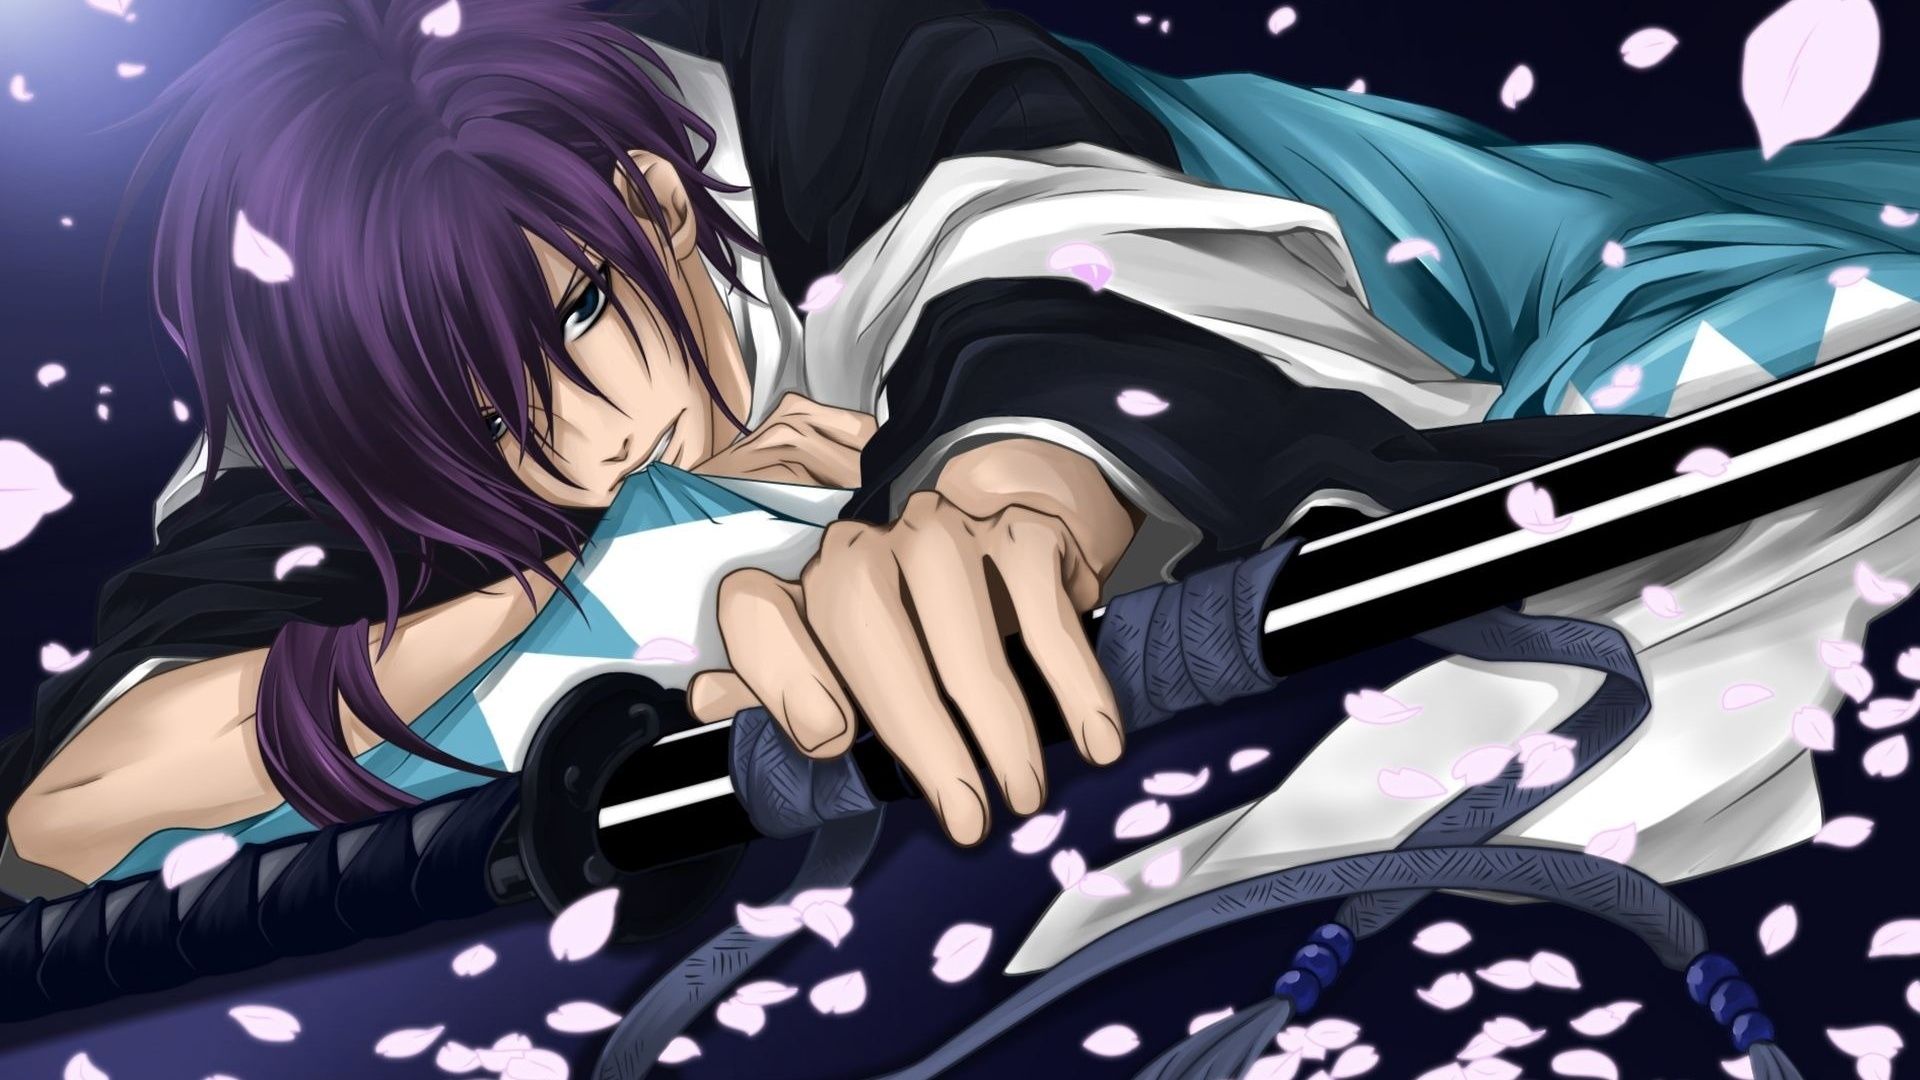 1920x1080 the sword, anime, guy, petals Wallpapers and Pictures 67073